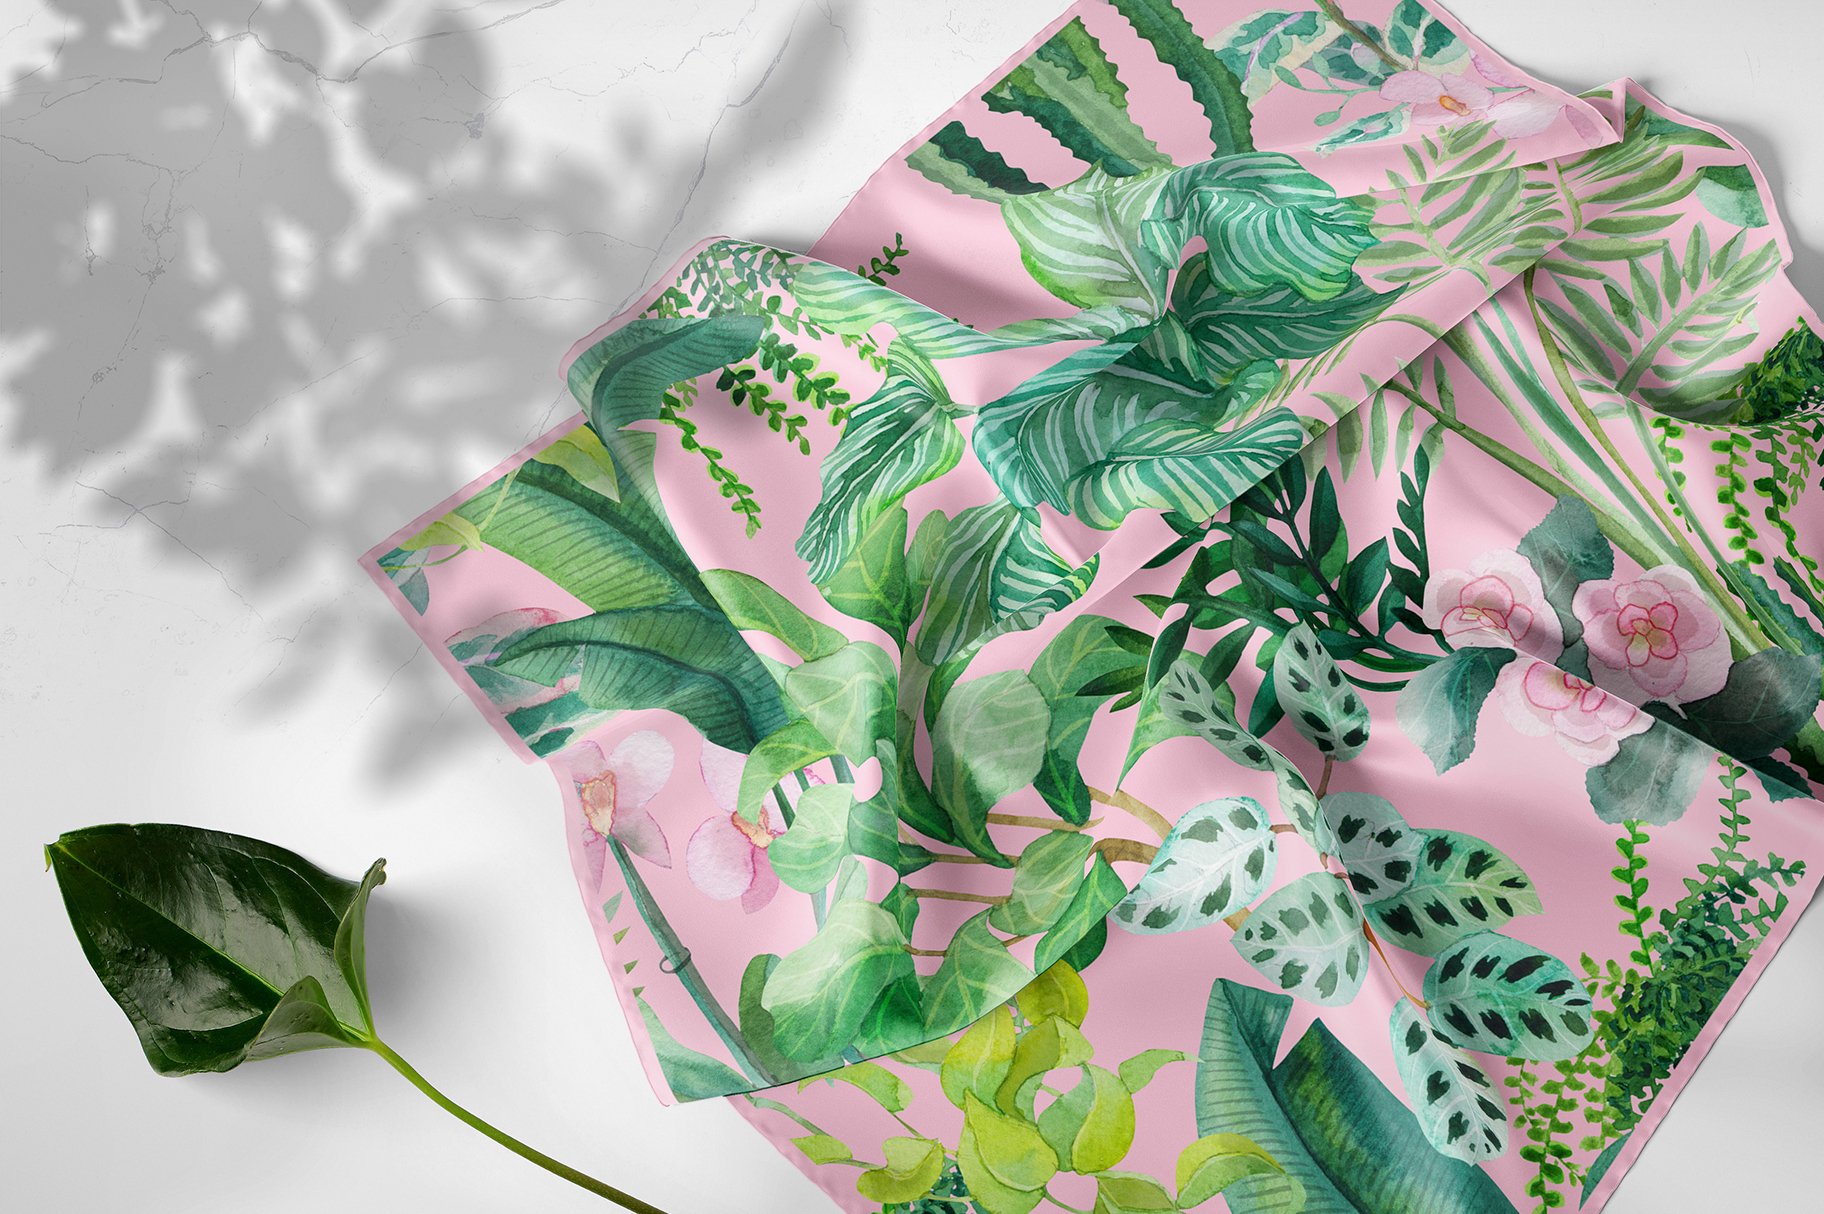 Pink scarf with green leaves and pink flowers.